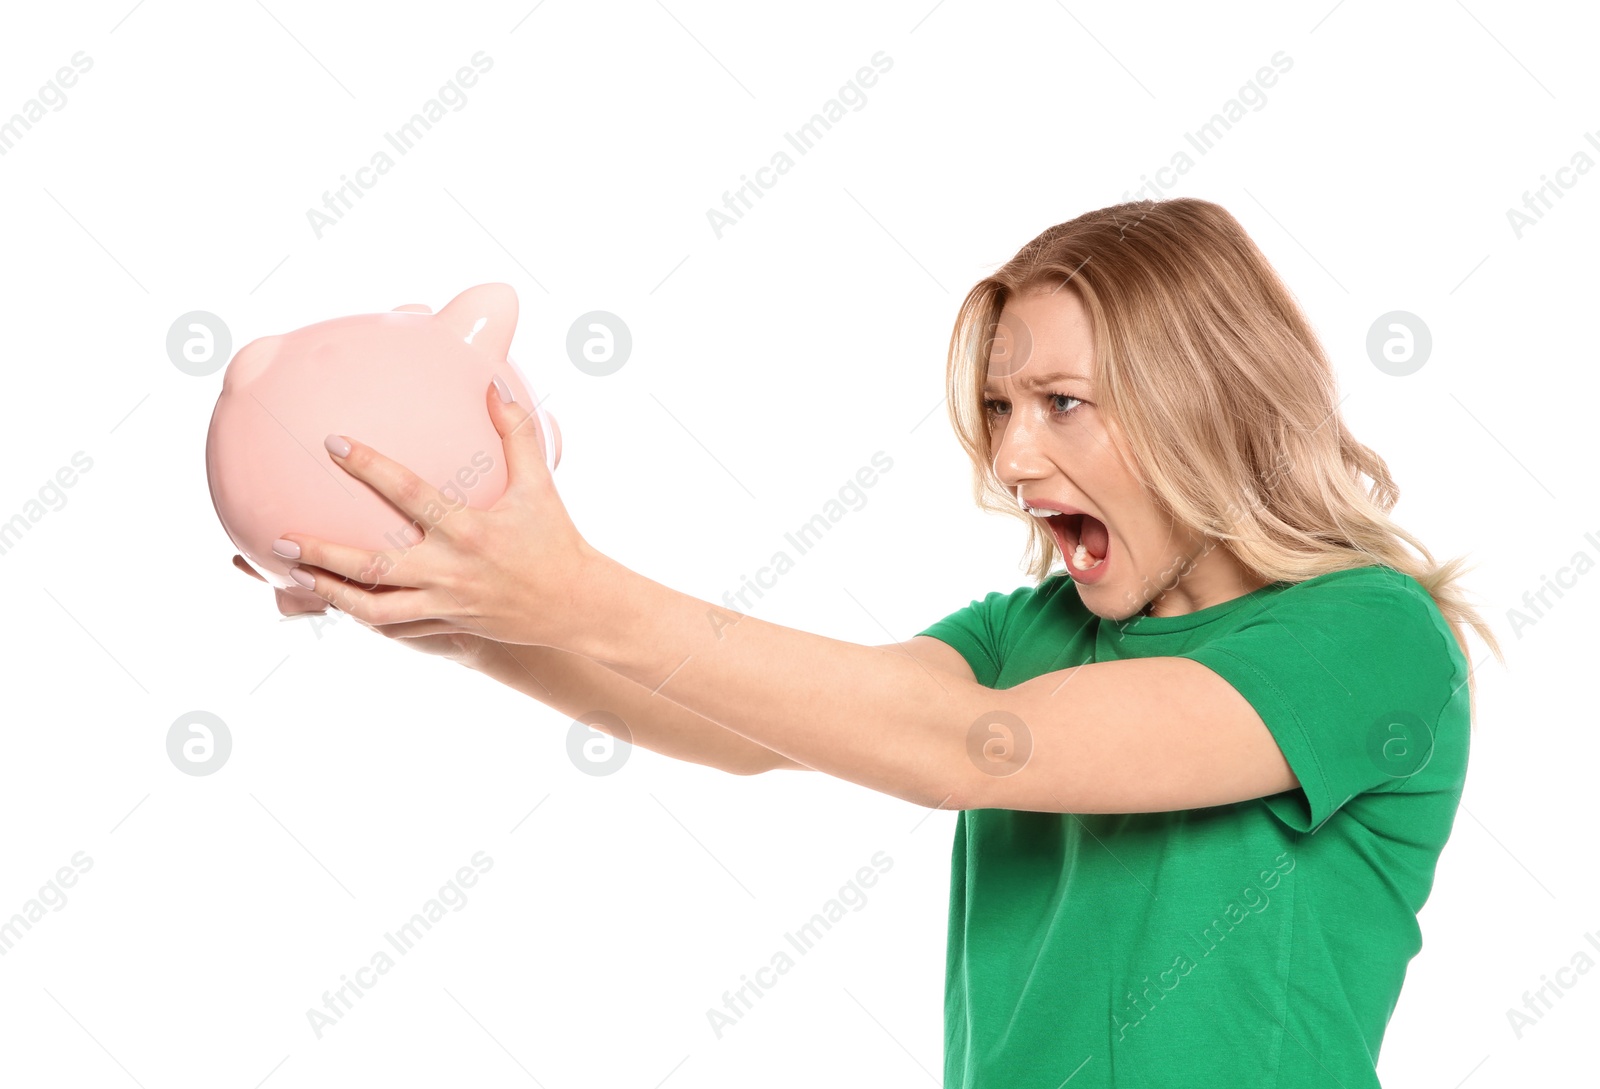 Photo of Emotional young woman with piggy bank on white background